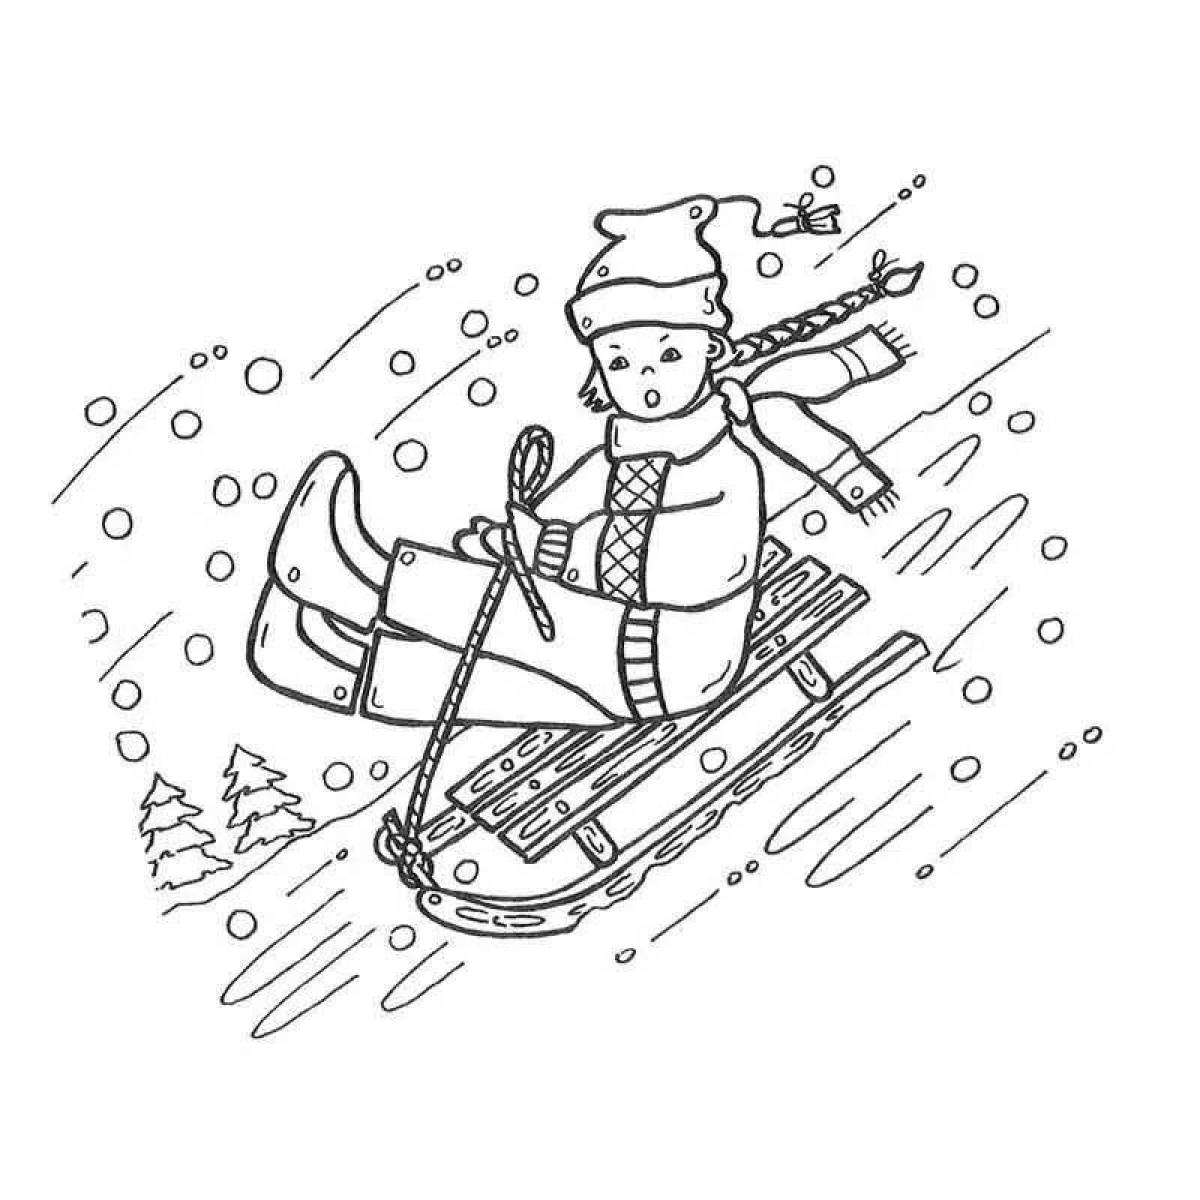 Coloring book adventure downhill skiing